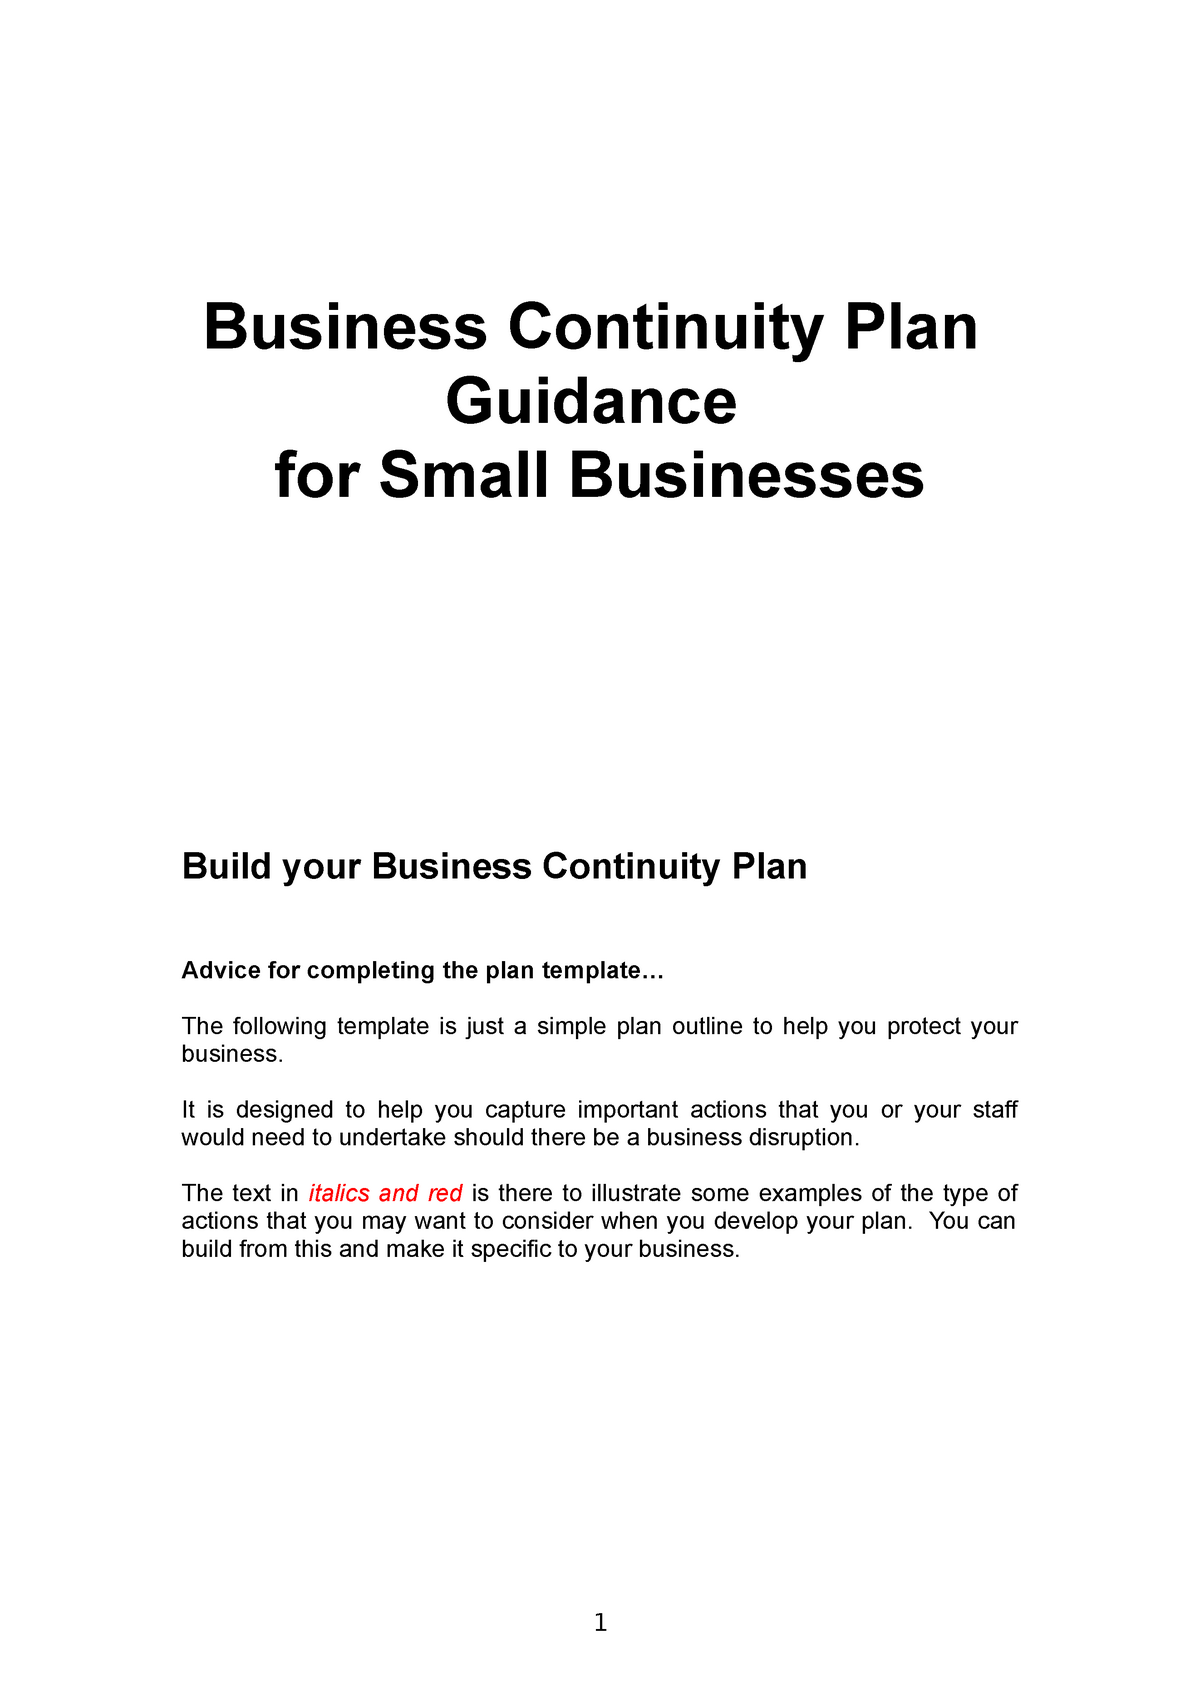 Detail Business Continuity Plan Template For Small Businesses Nomer 49